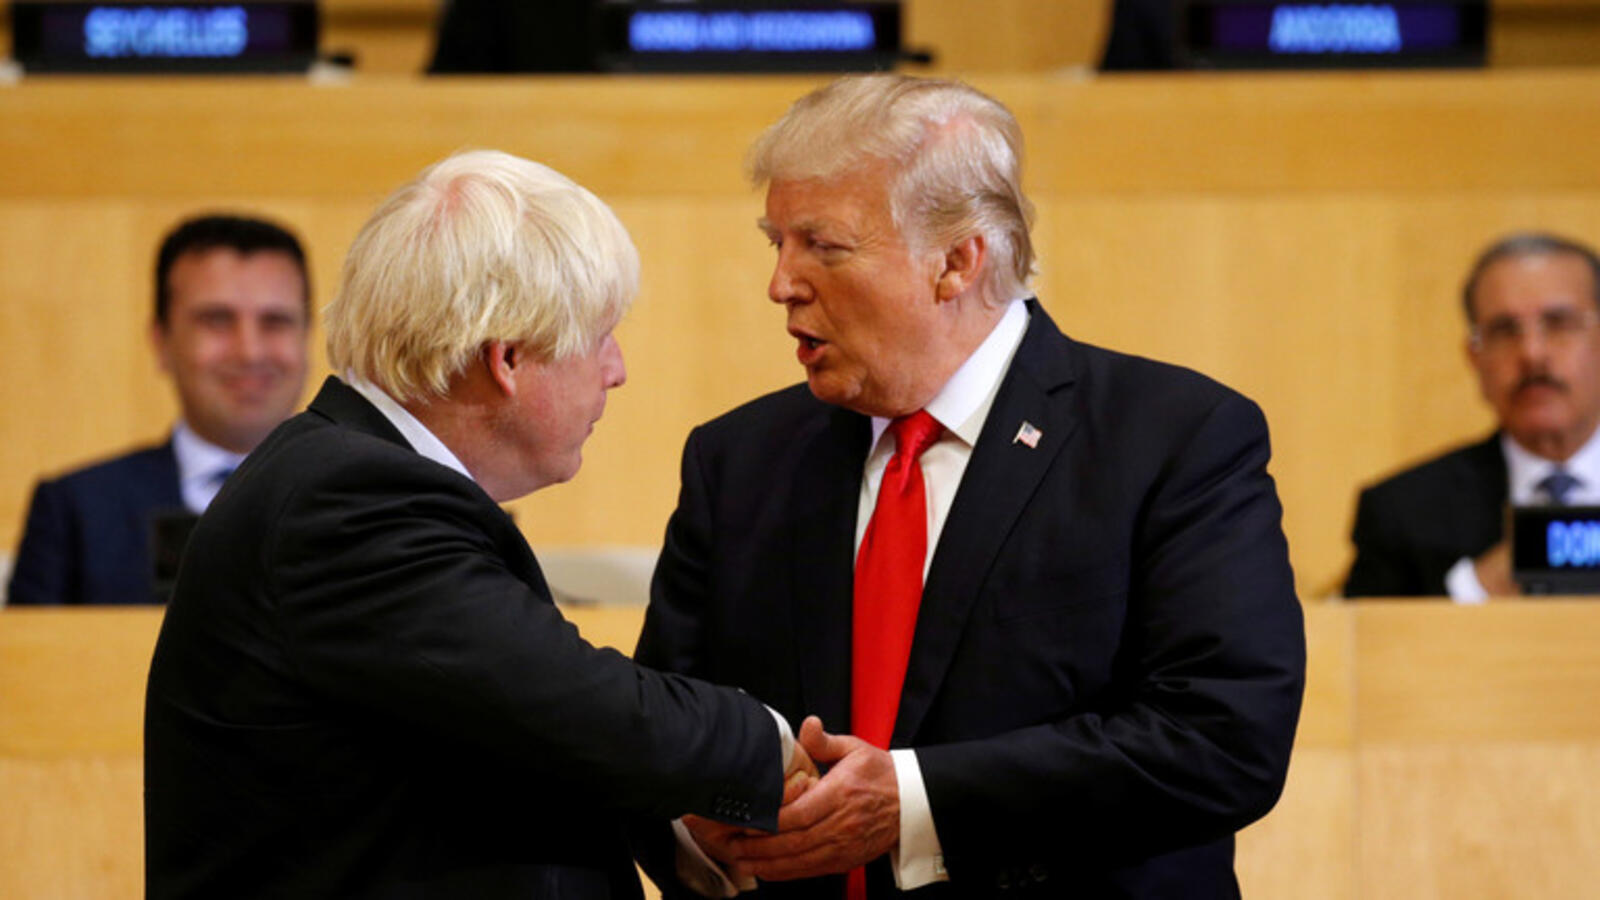 Agreement between Trump and Johnson to conclude a trade agreement by July 52392019_88